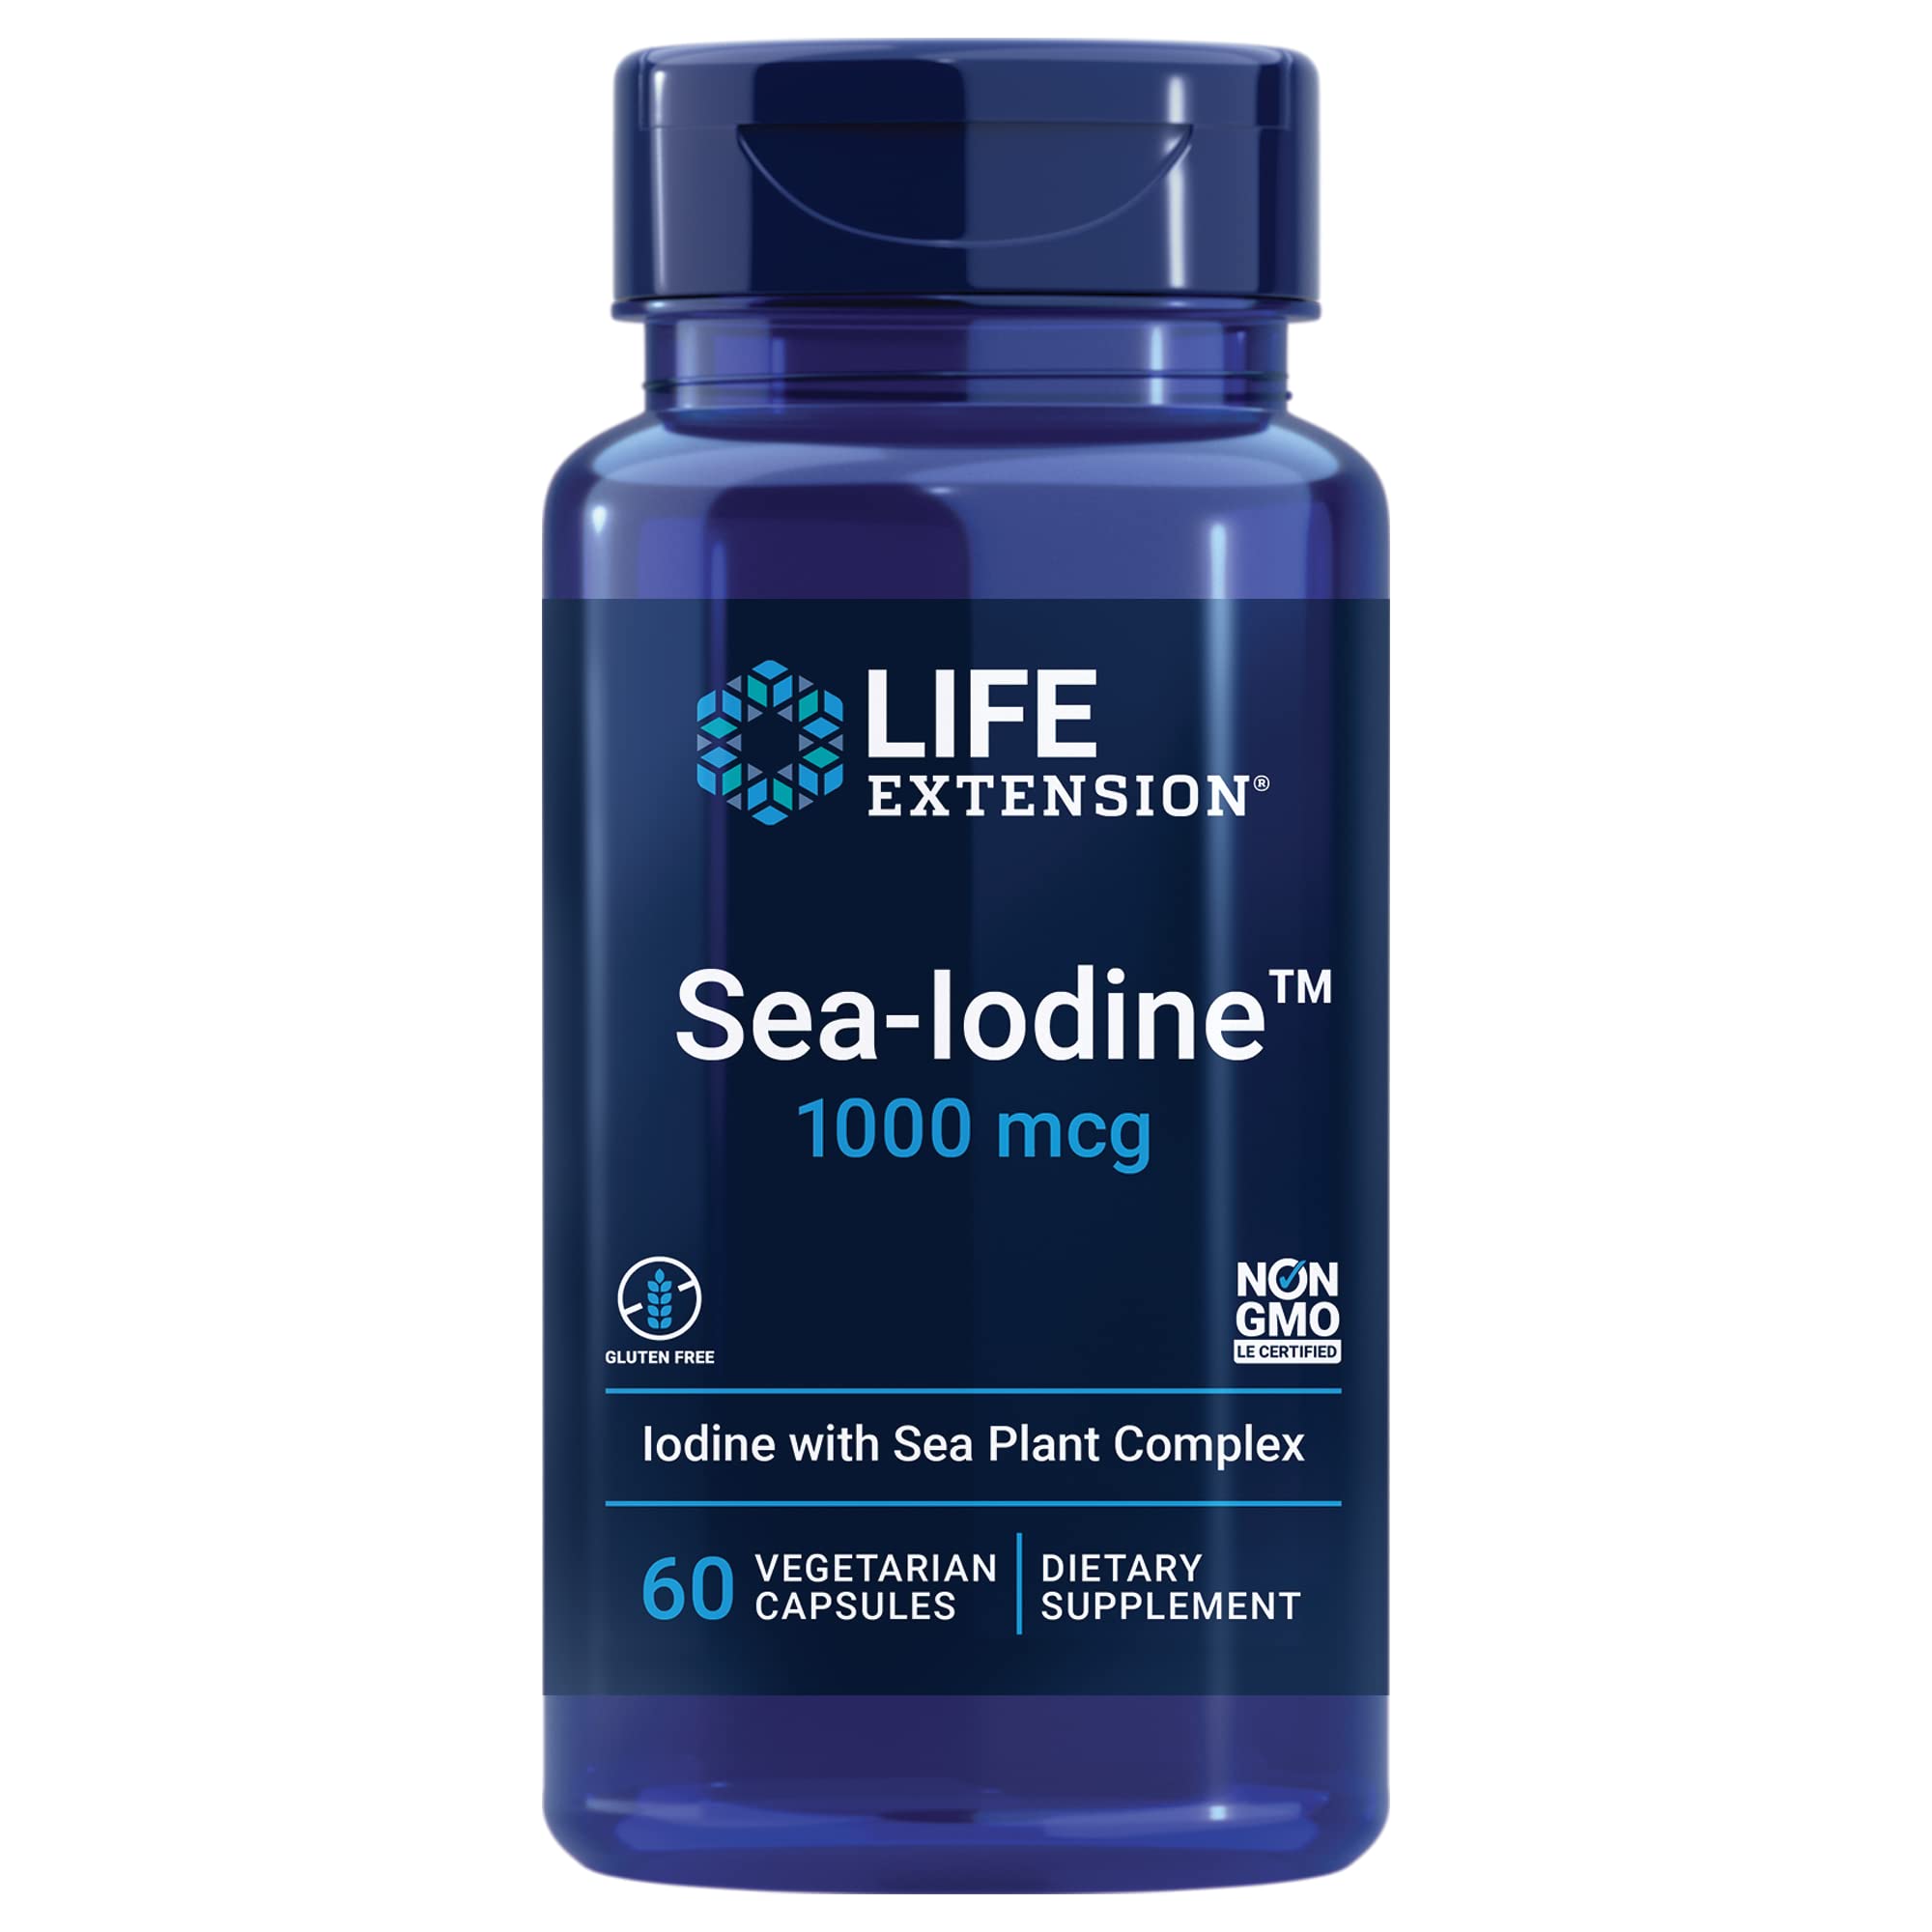 Book Cover Life Extension Sea-Iodine 1000 mcg – Iodine Supplement Without Salt – Iodine From Organic kelp and Bladder Wrack Extracts - Gluten-Free, Non-GMO, Vegetarian - 60 Capsules 60 Count (Pack of 1)